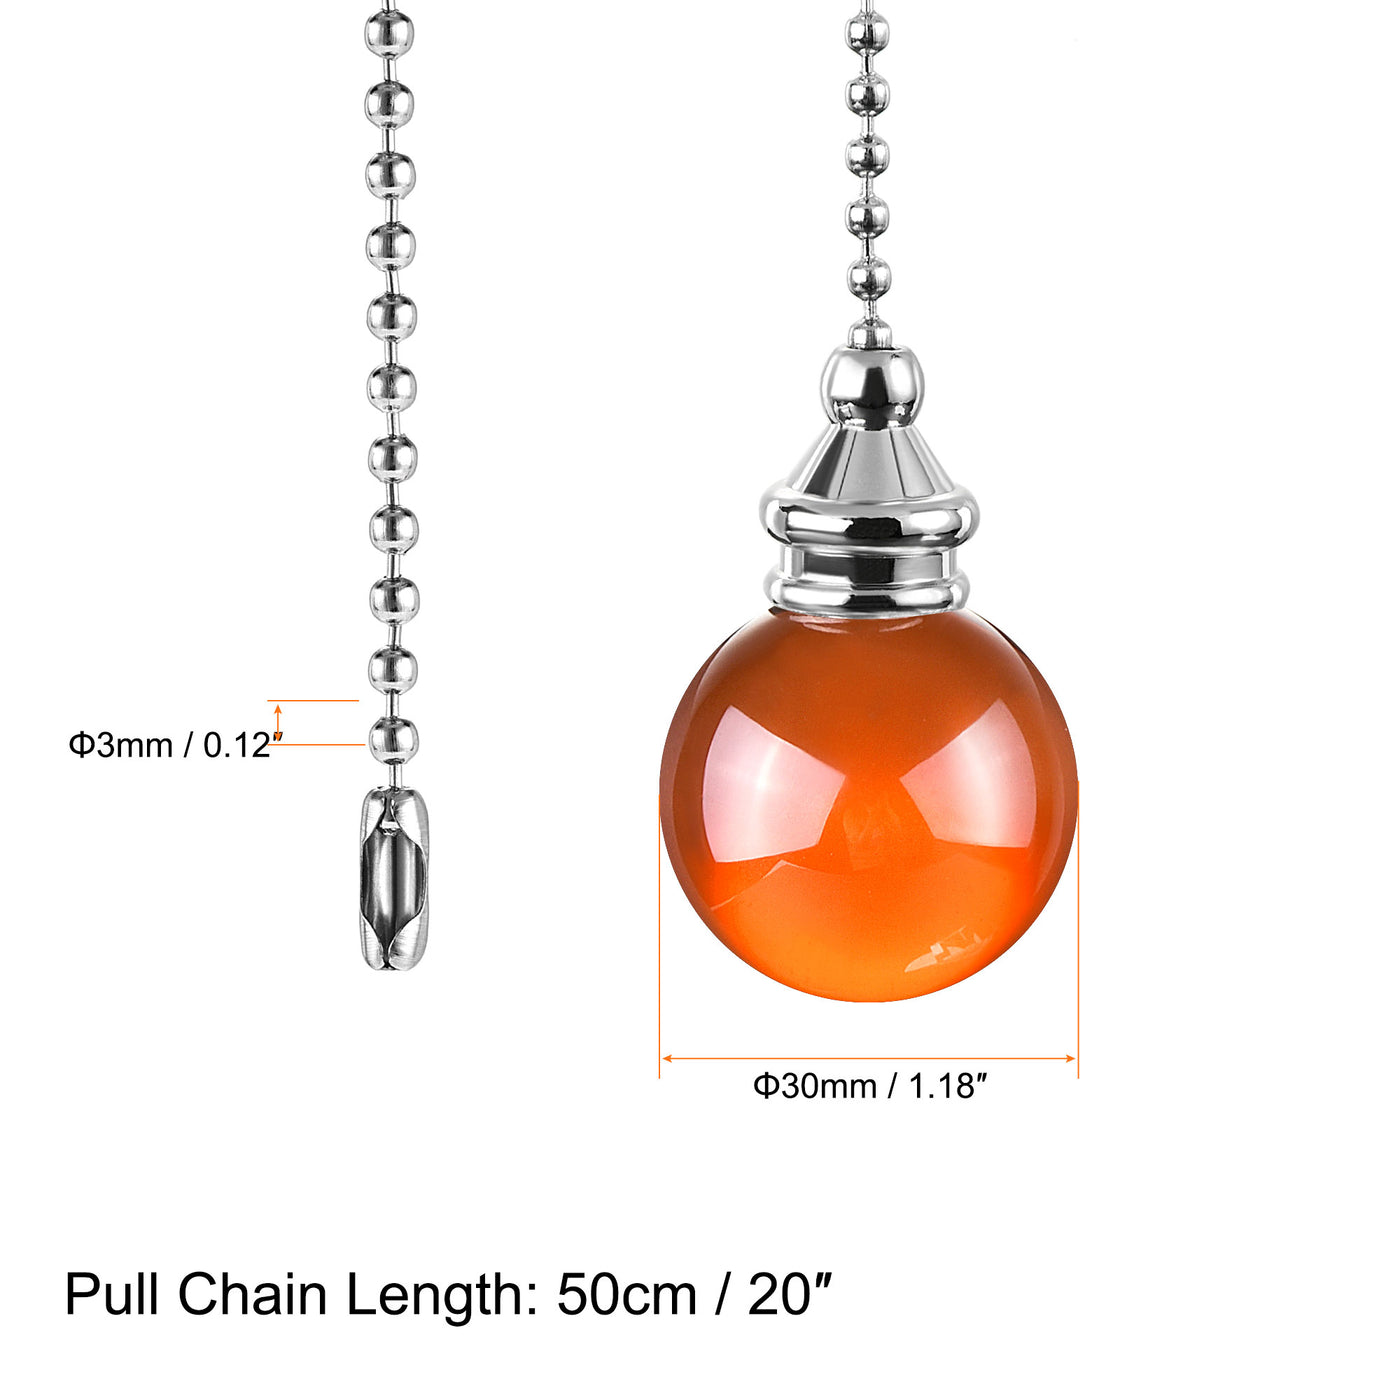 uxcell Uxcell Ceiling Fan Pull Chain, 20 Inch Fan Pull Chain Ornament Extension Lighting Accessories, 30mm Crystal Ball Pendant, Amber